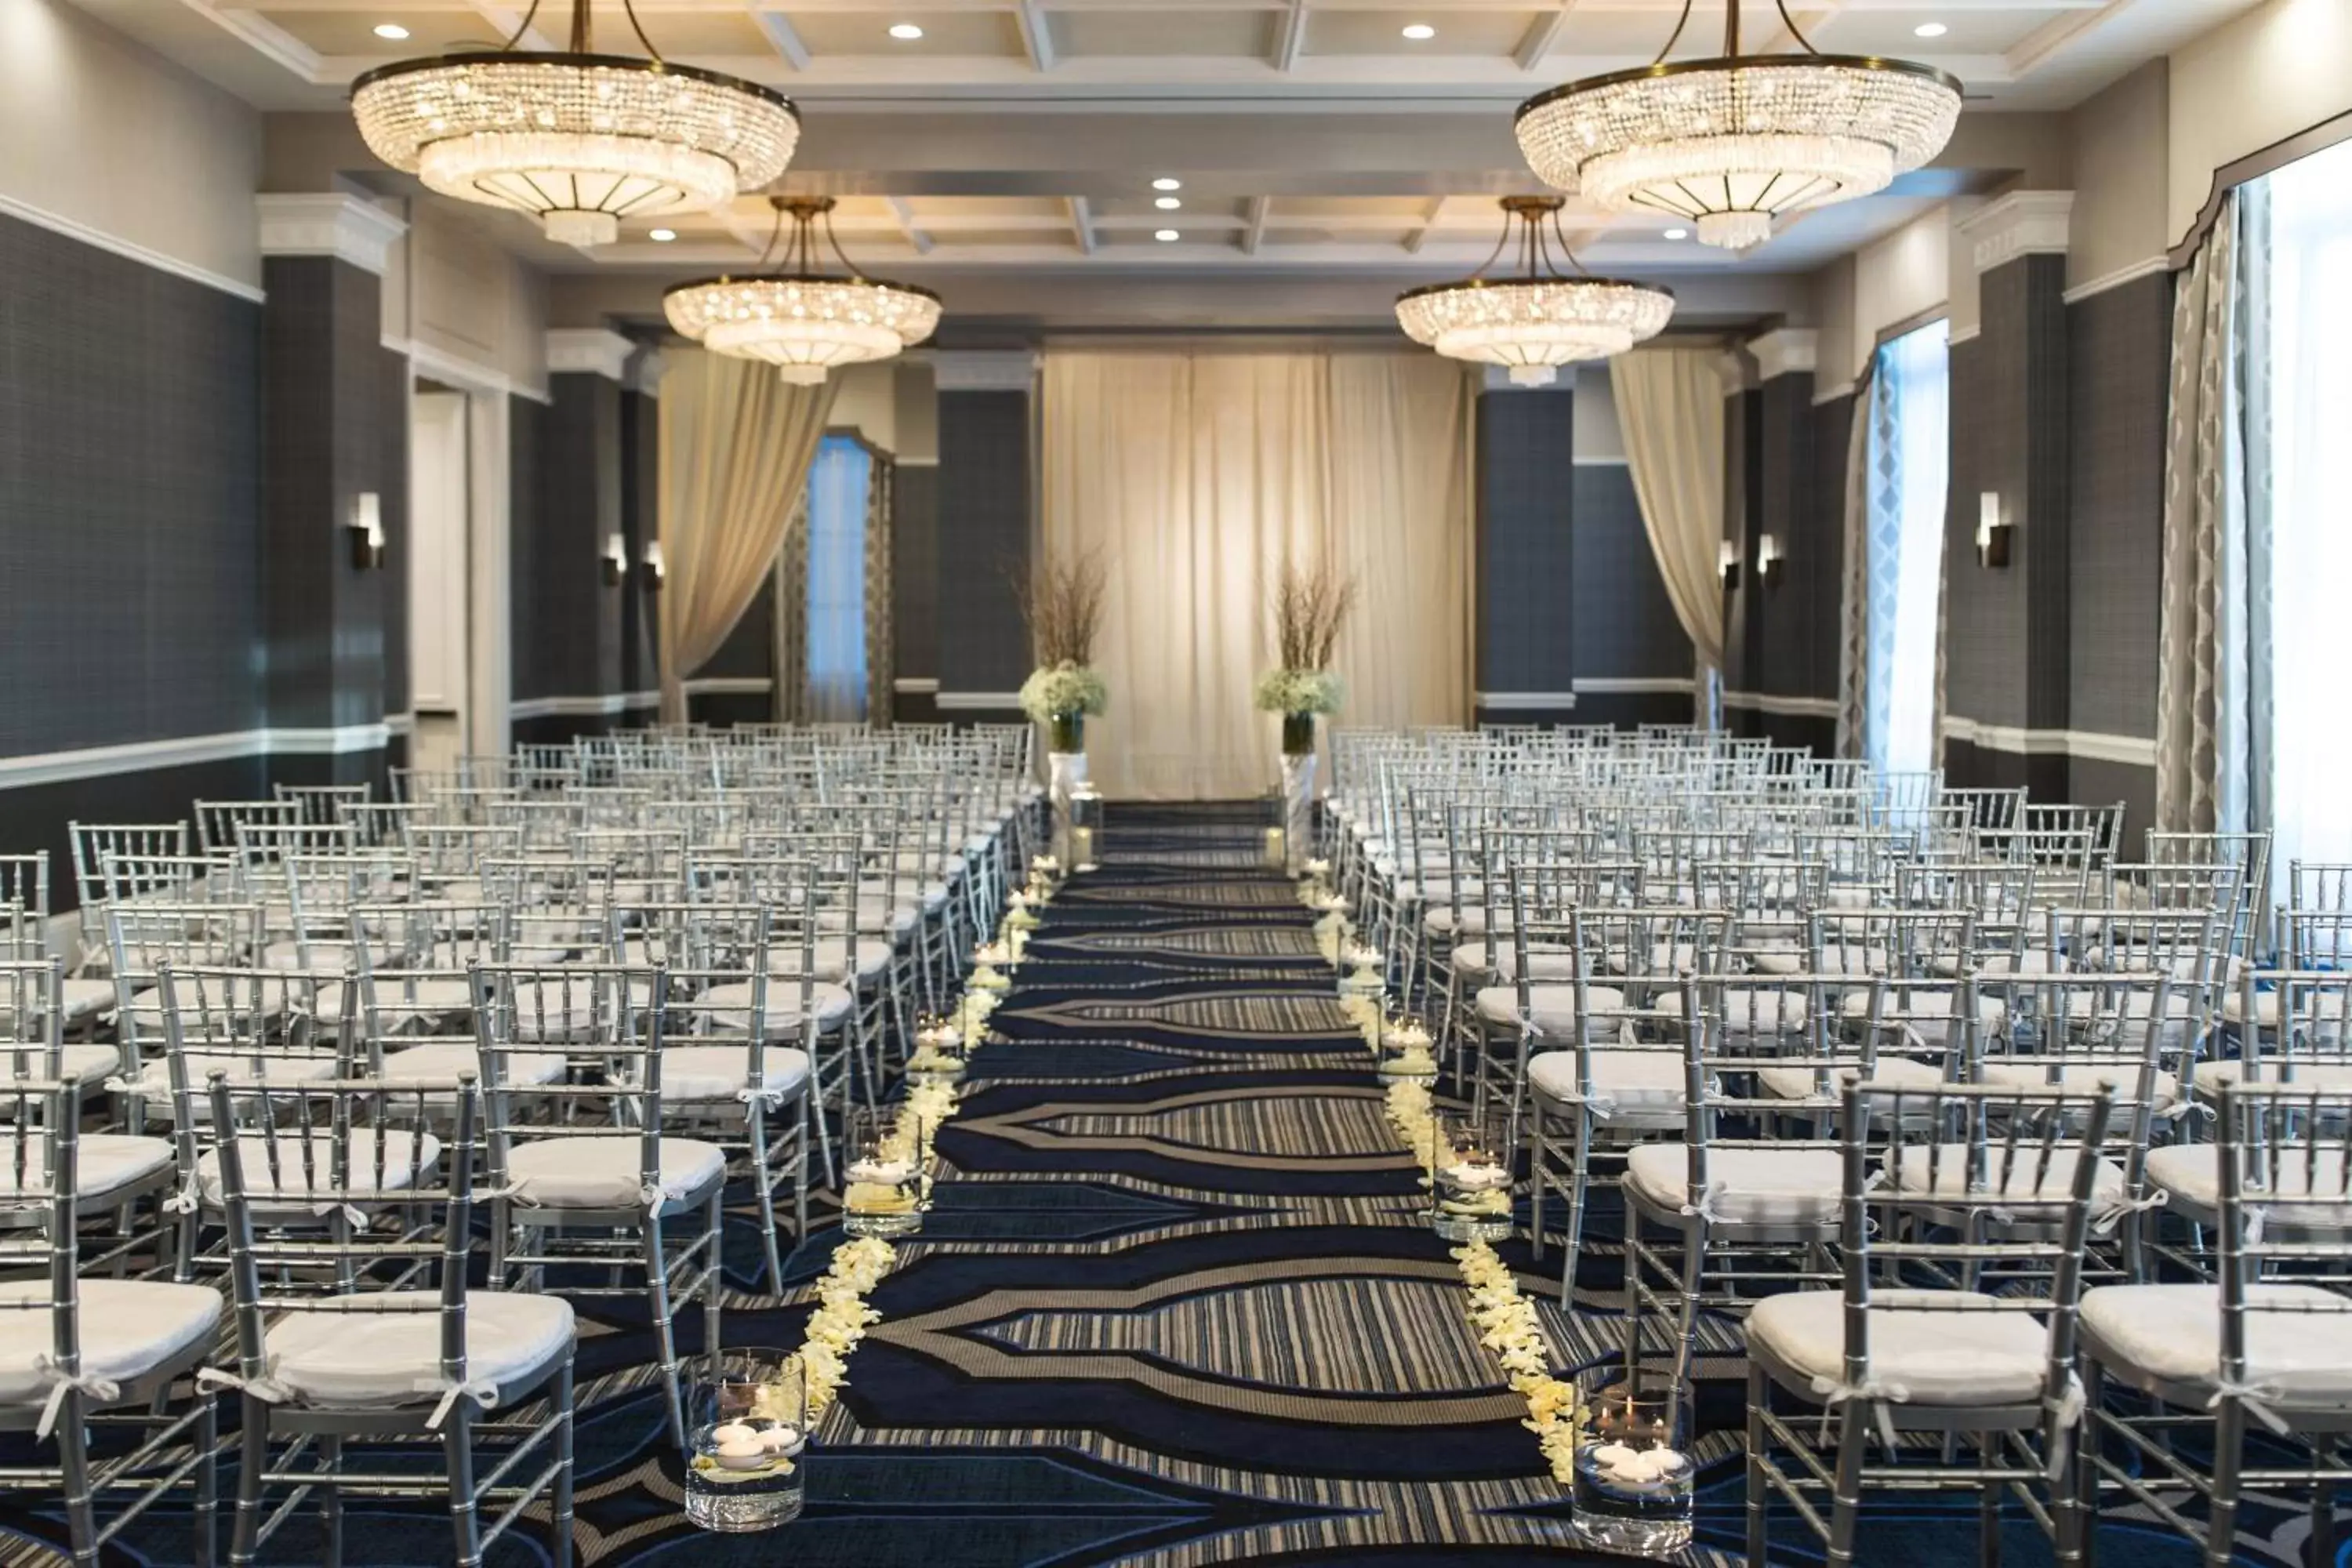 Banquet/Function facilities, Banquet Facilities in The Notary Hotel, Philadelphia, Autograph Collection